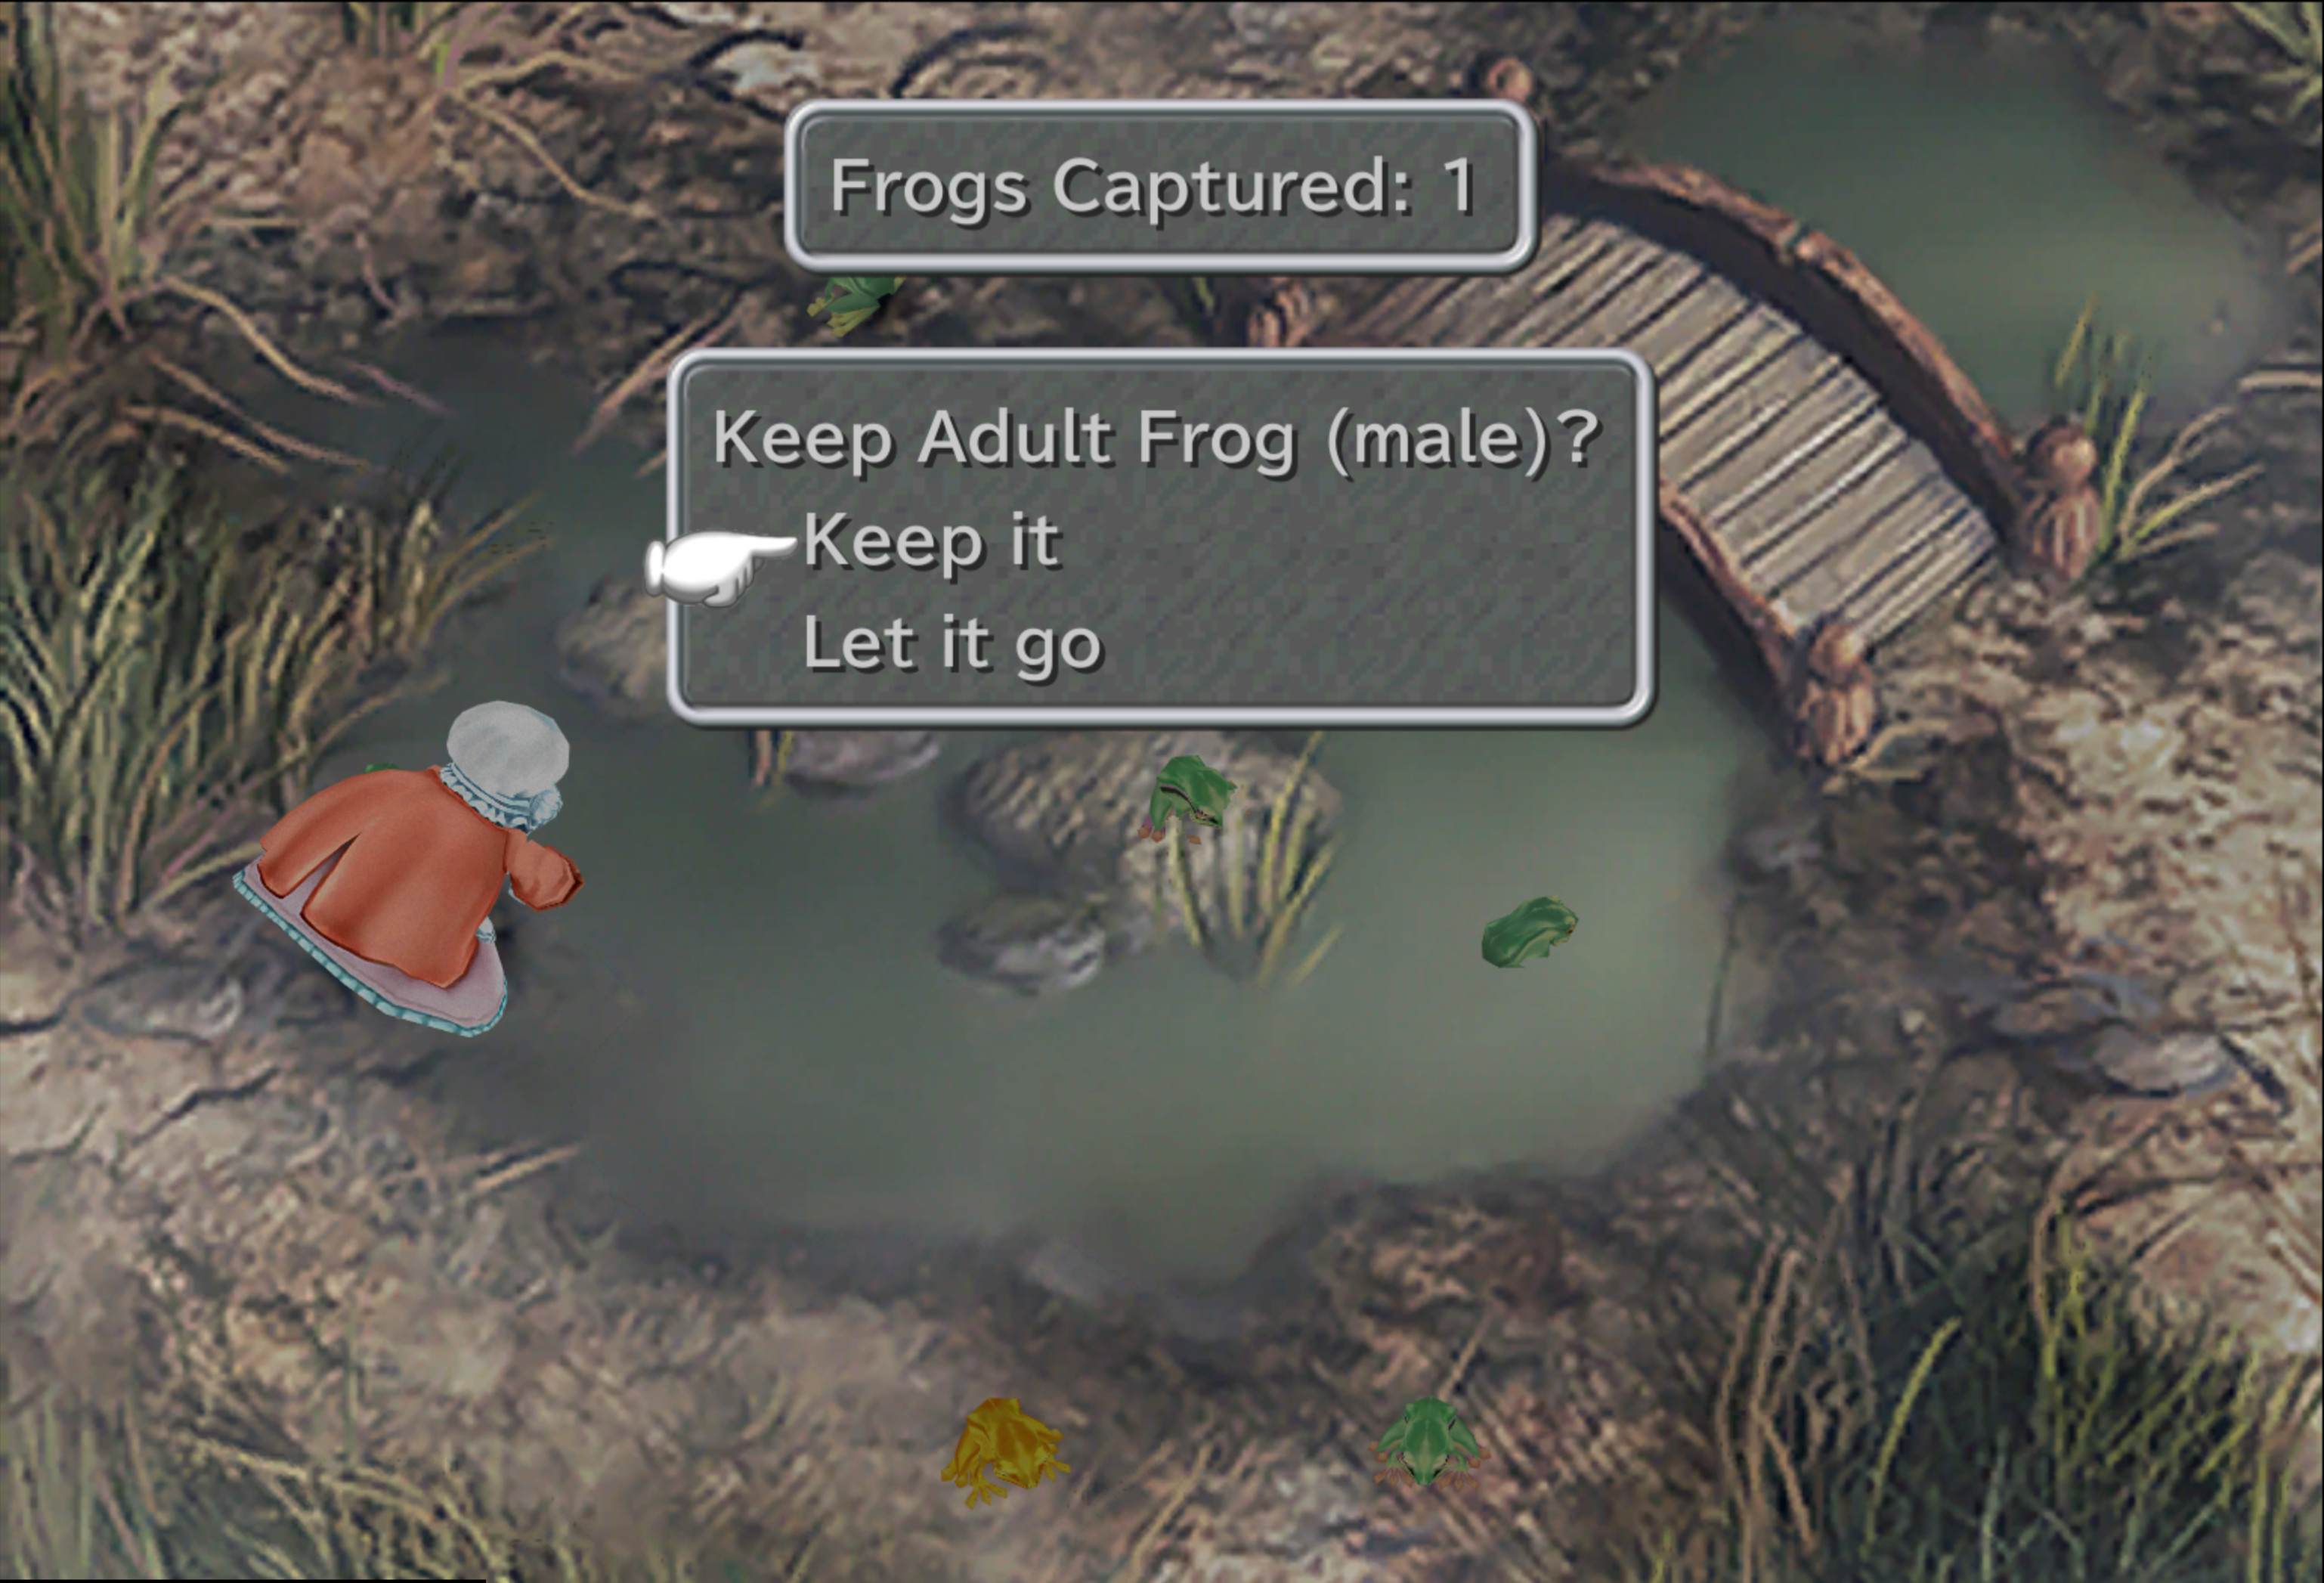 https://static.wikia.nocookie.net/finalfantasy/images/6/67/Frog_Catching.JPG/revision/latest?cb=20210617200041